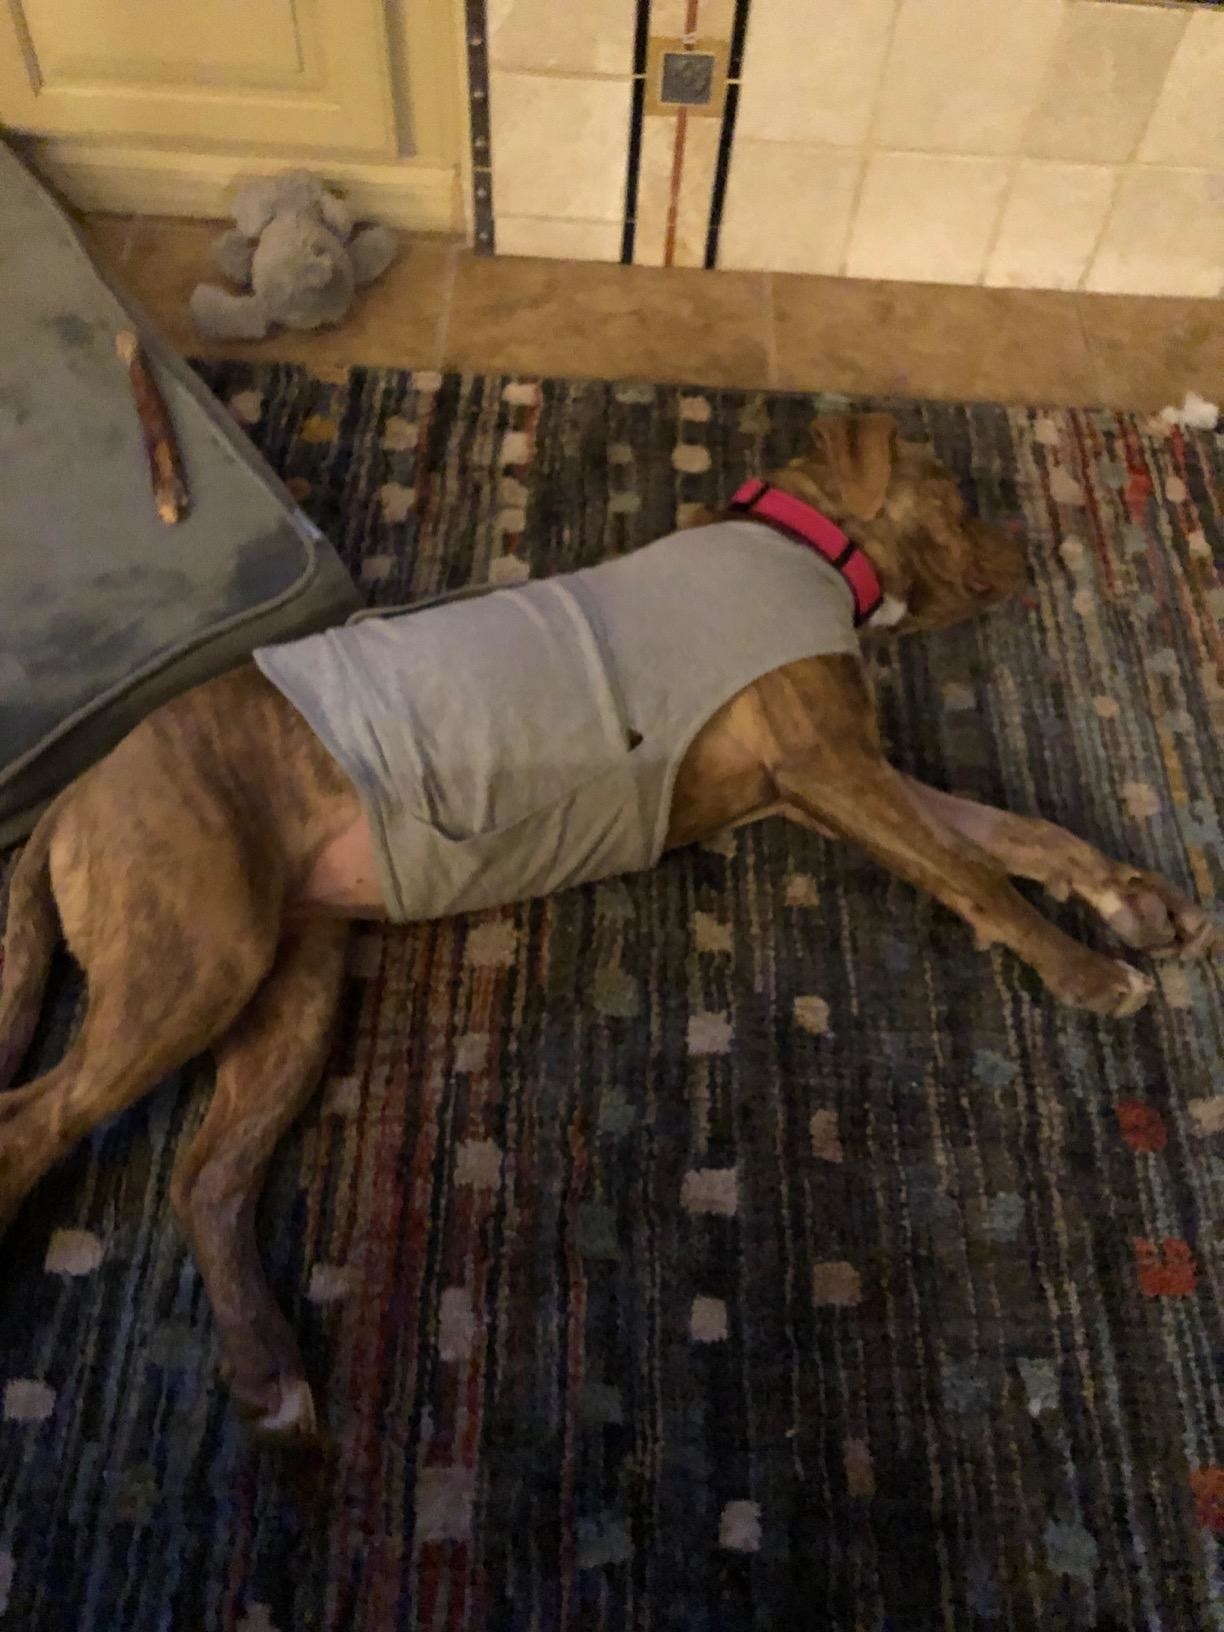 The vest, which wraps around the dogs upper shoulders and belly, leaving their front paws and rear body free